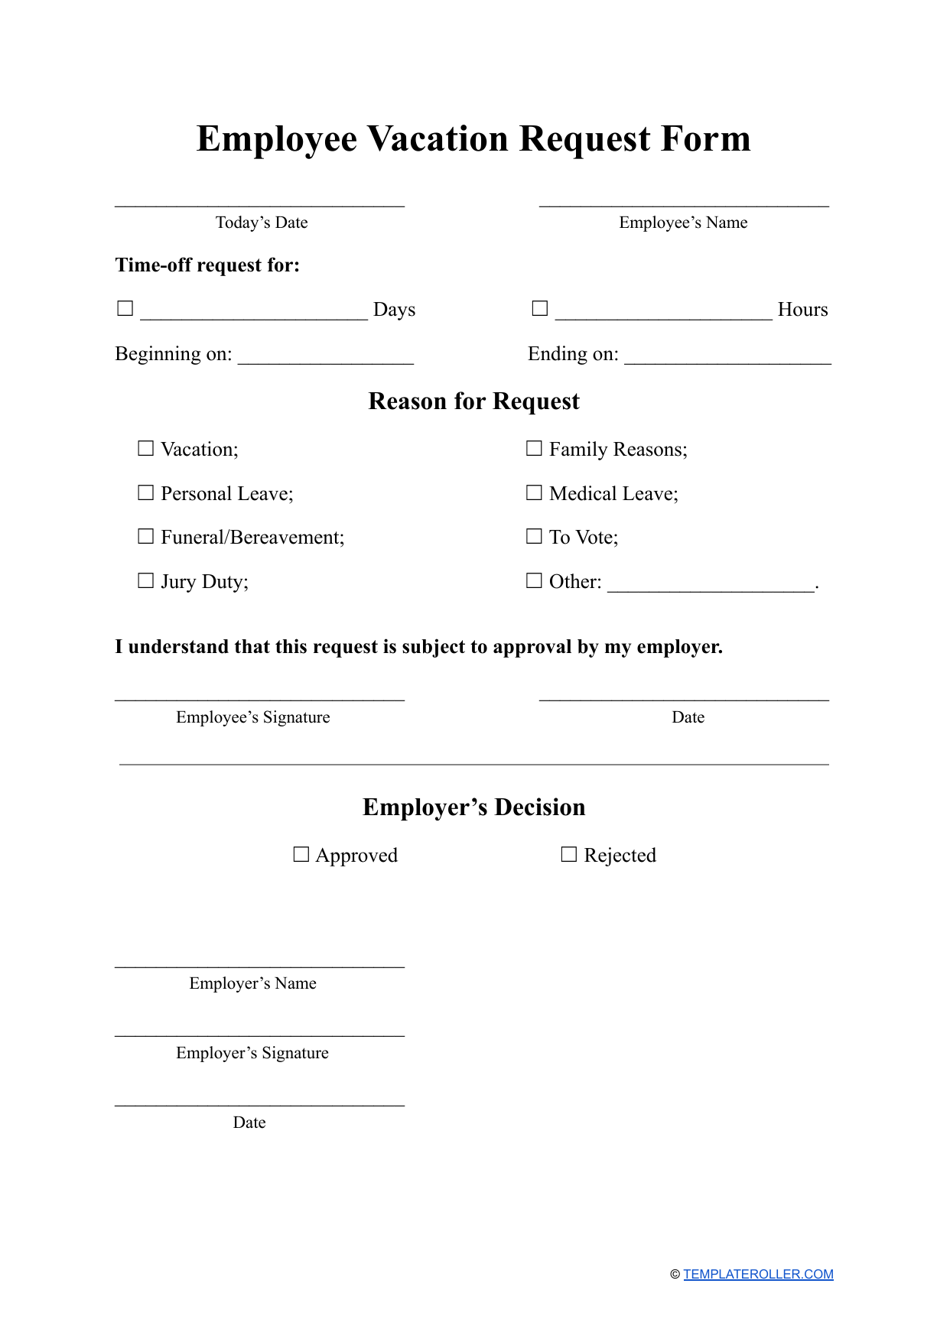 Printable Employee Vacation Request Form Printable Forms Free Online